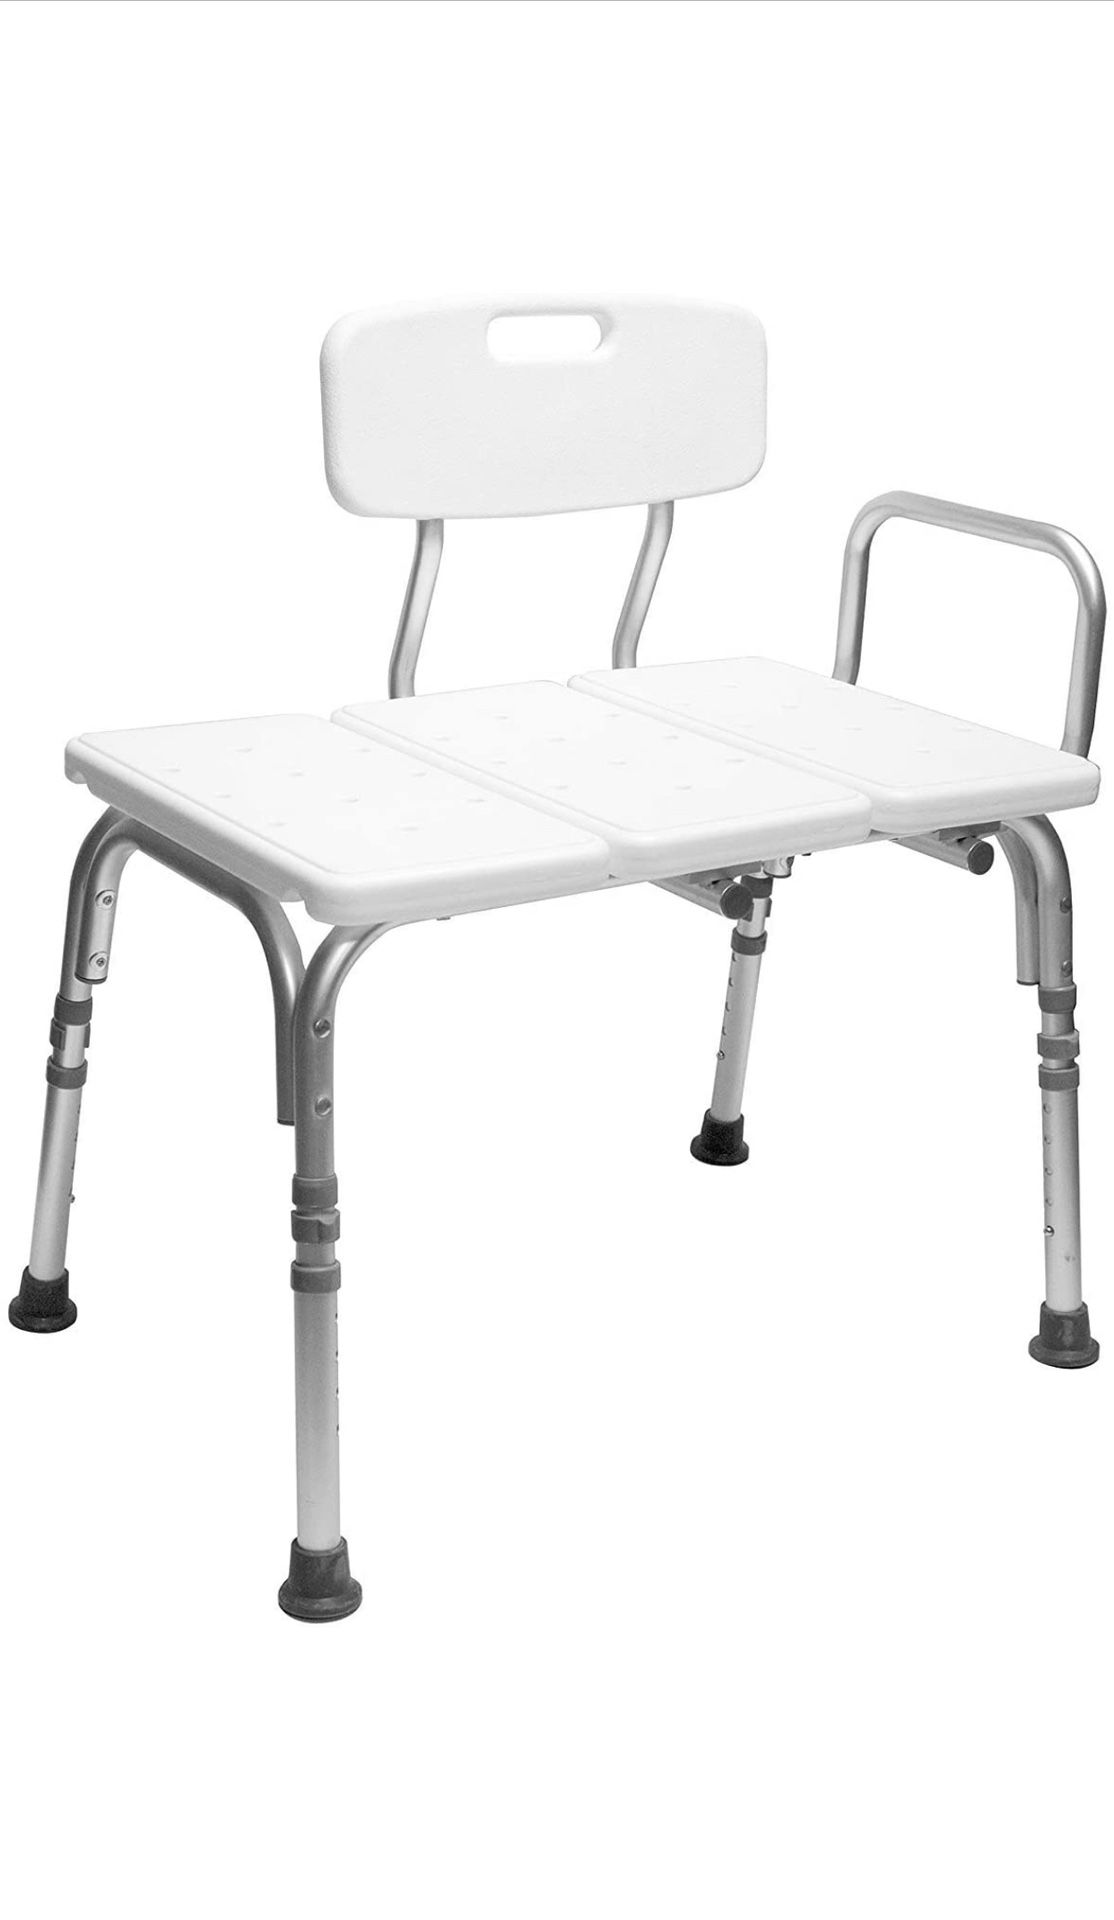 Carex Tub Transfer Bench - Shower Chair Transfer Bench with Height Adjustable Legs - Convertible to Right or Left Hand Entry